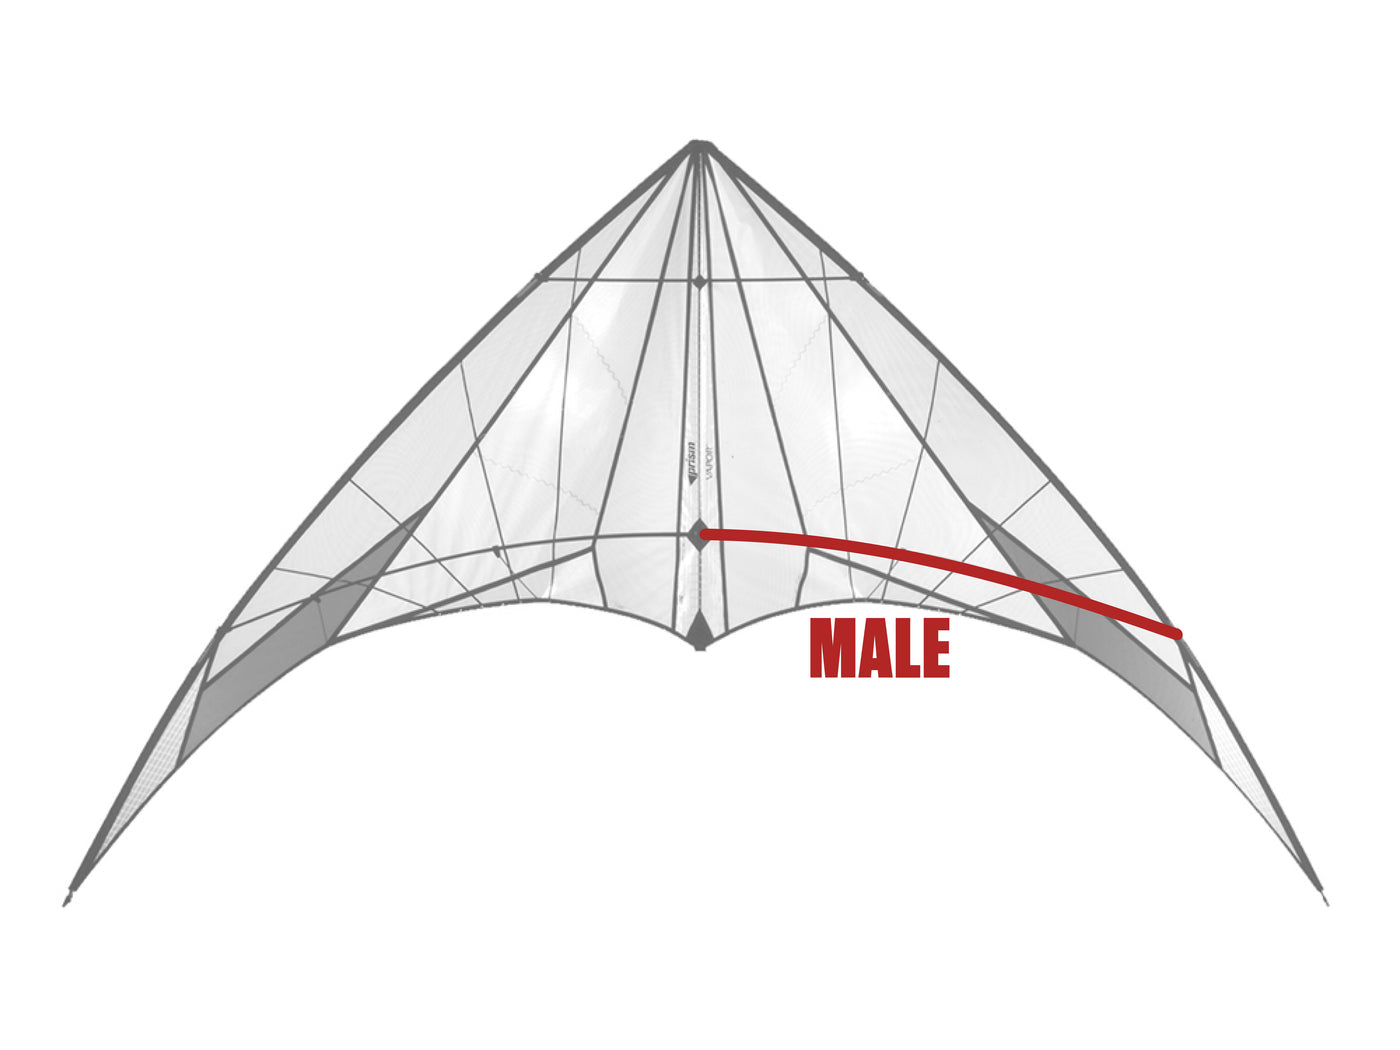 Diagram showing location of the Vapor Lower Spreader (Male) on the kite.